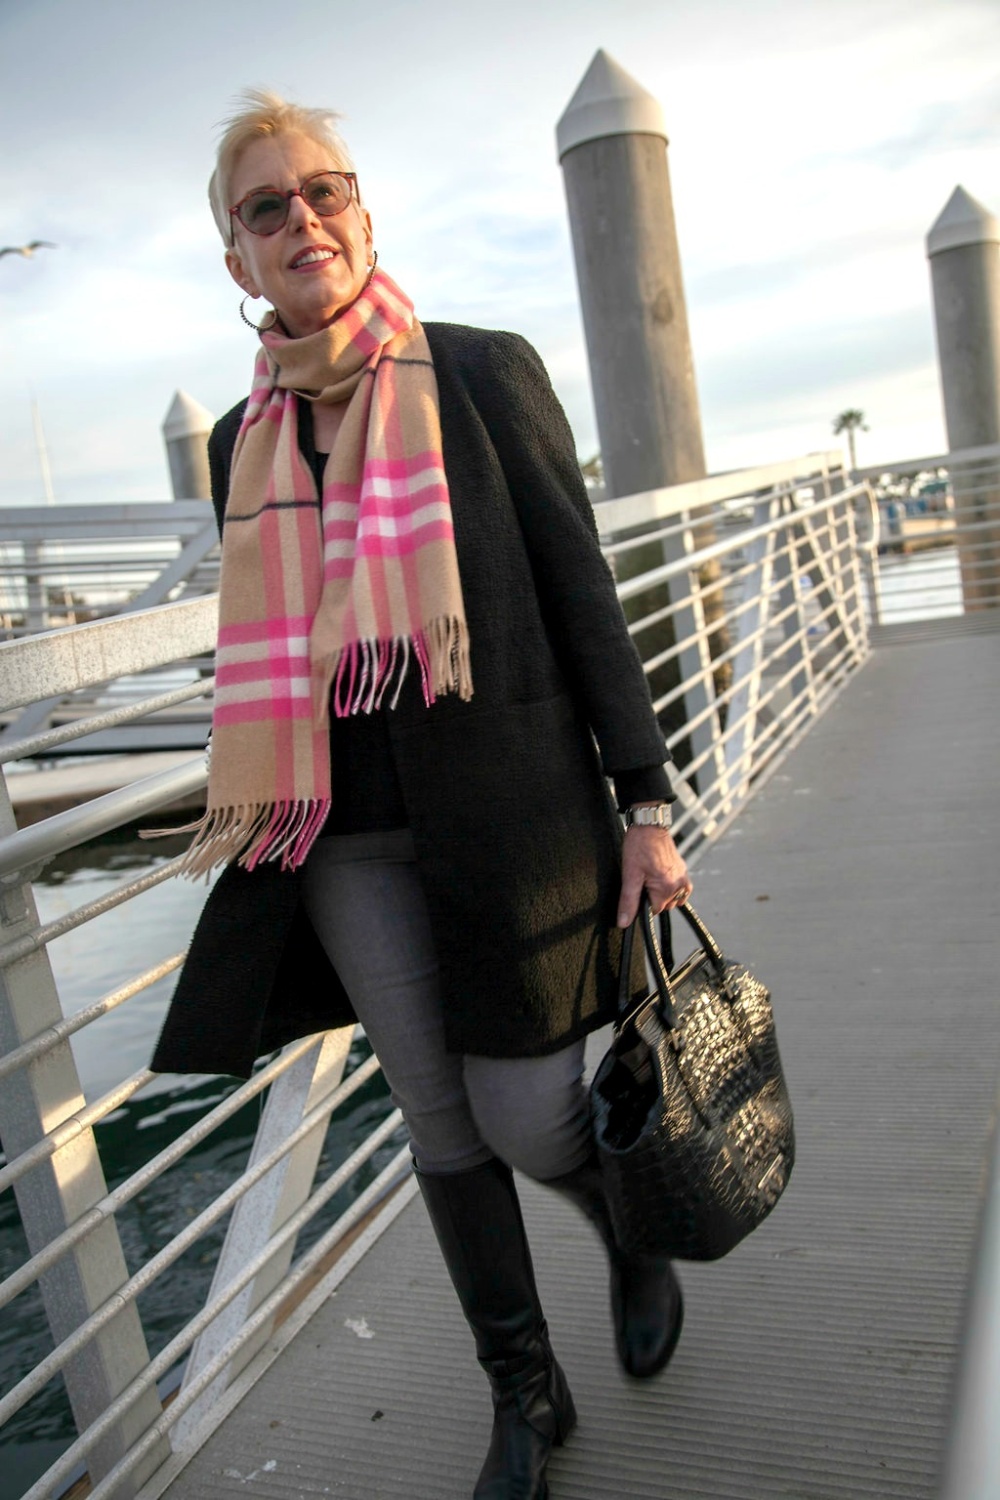 A touch of bright pink in this Burberry check scarf livens up a neutral outfit. Details at une femme d'un certain age.